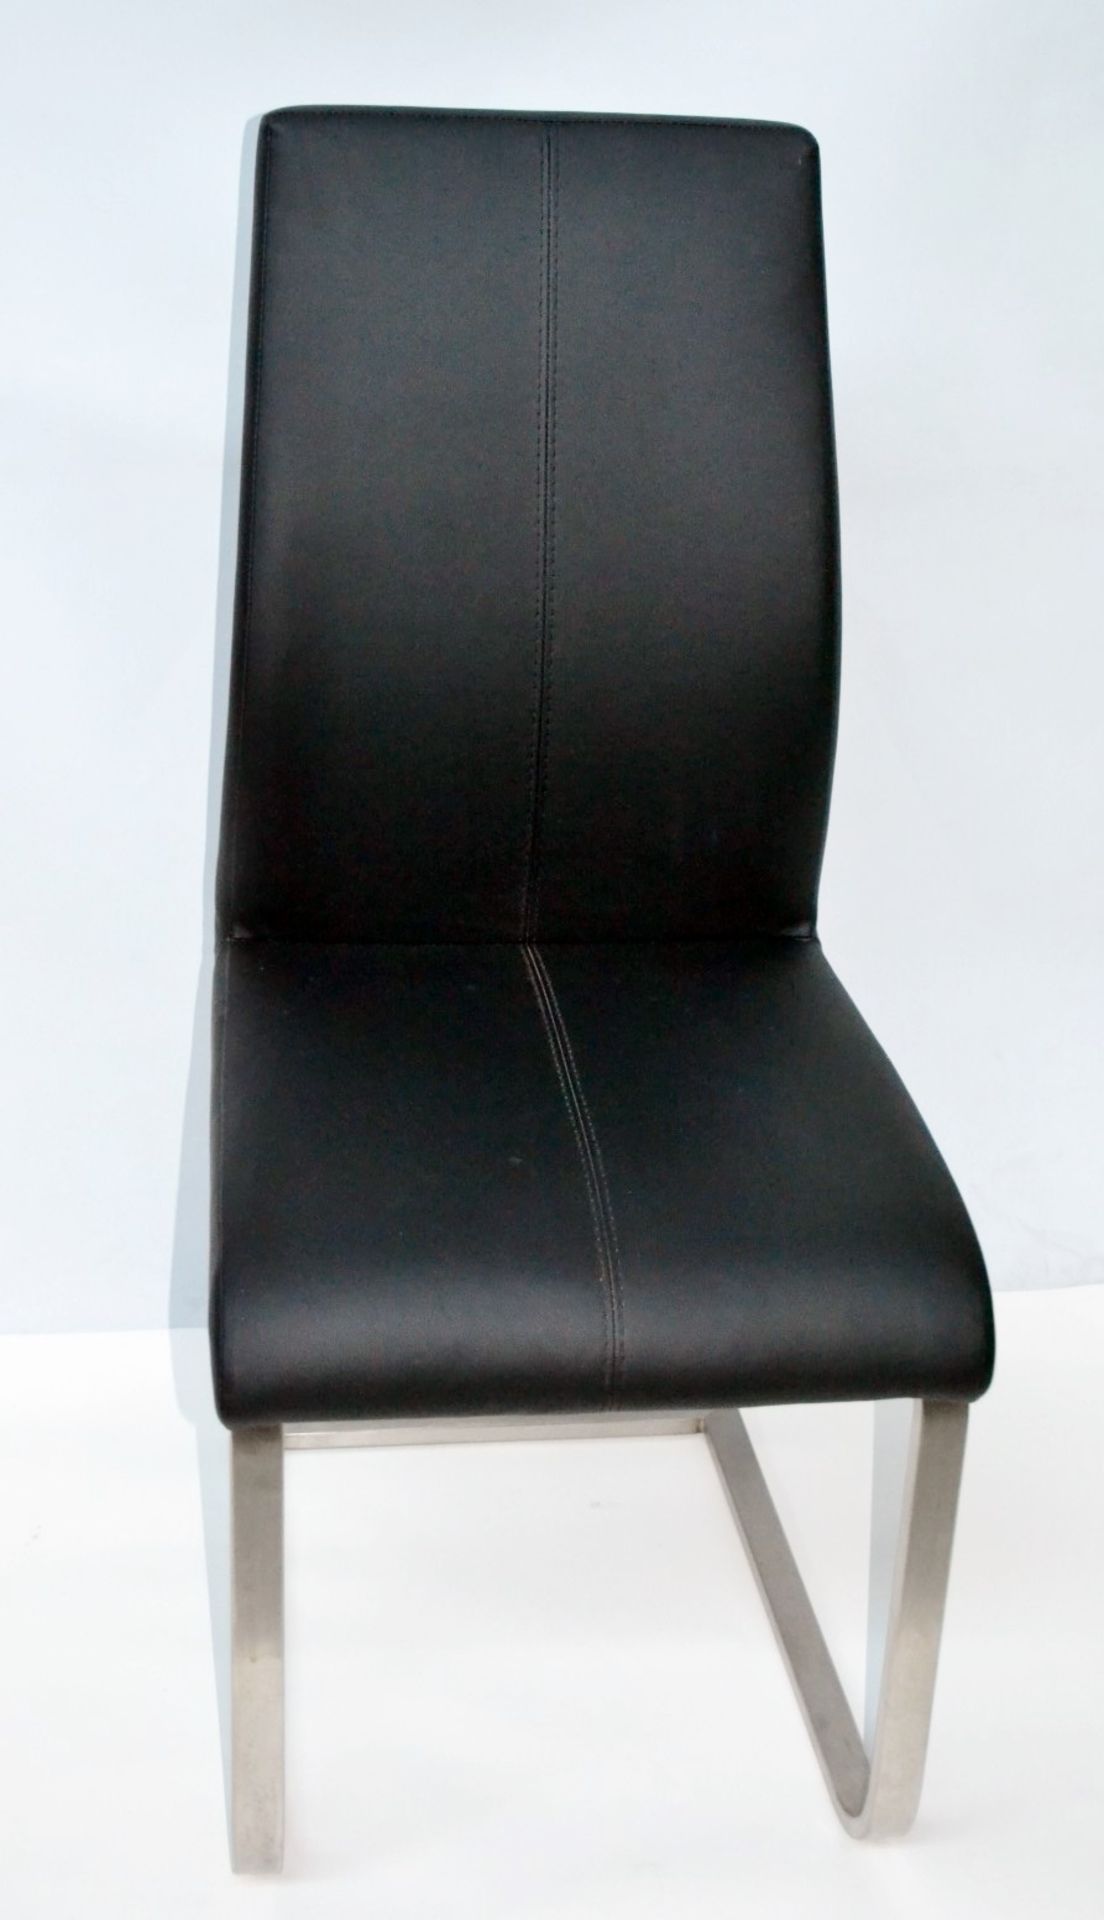 4 x Black Soft Leather Dining Chairs - Featuring A Curved Ergonomic Design With Metal Cantilever Bas - Image 2 of 4